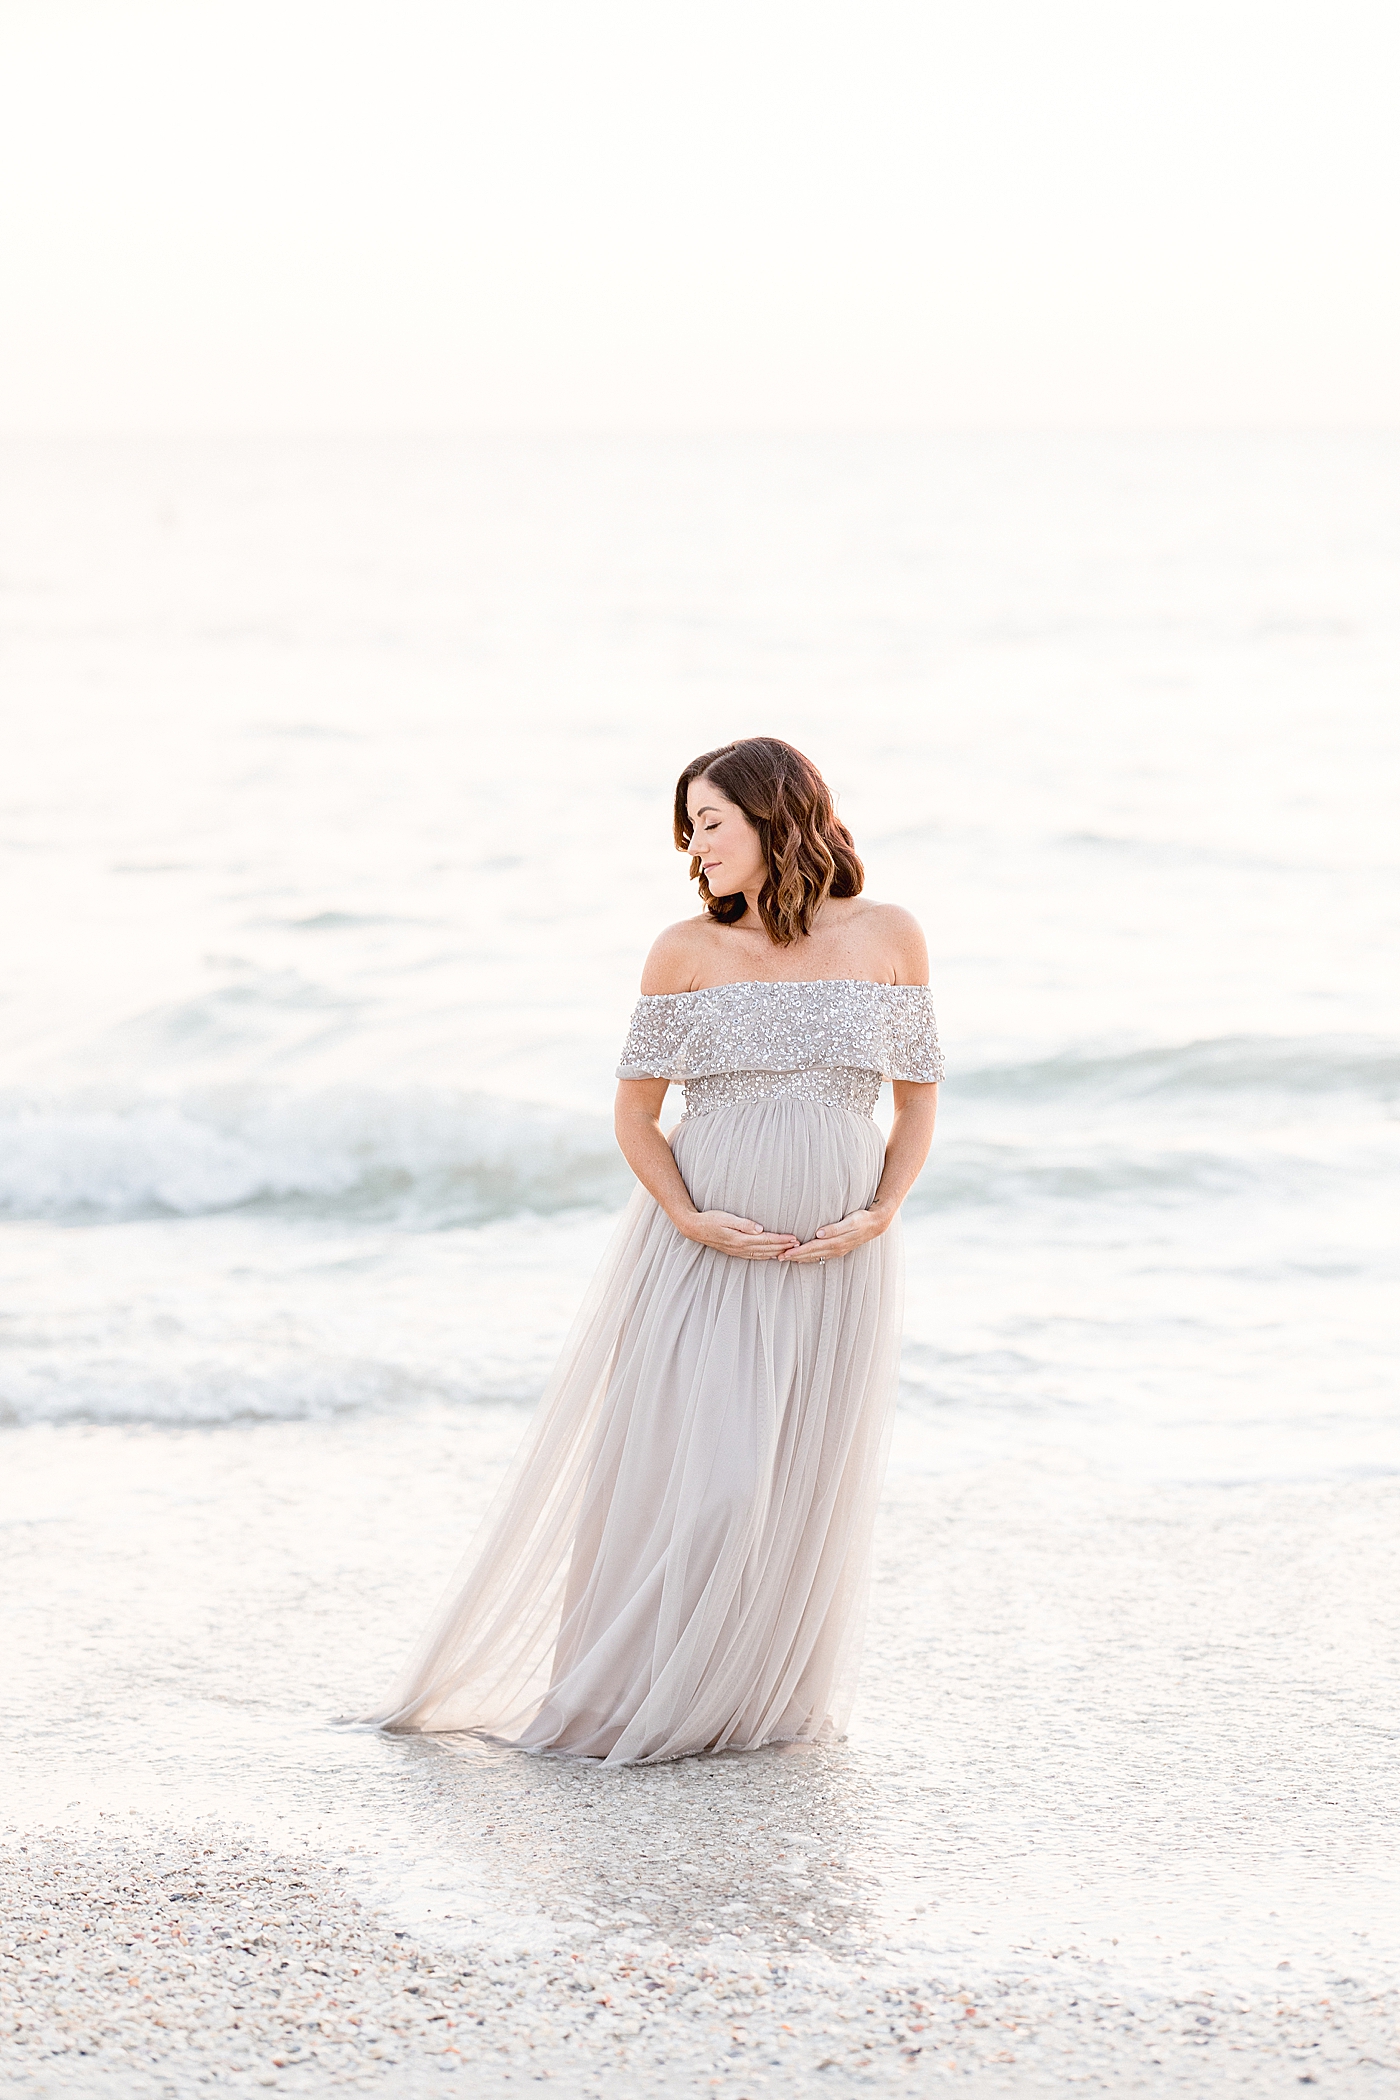 Maternity session on the beach with Mom in long, beautiful dress. Photo by Brittany Elise Photography.